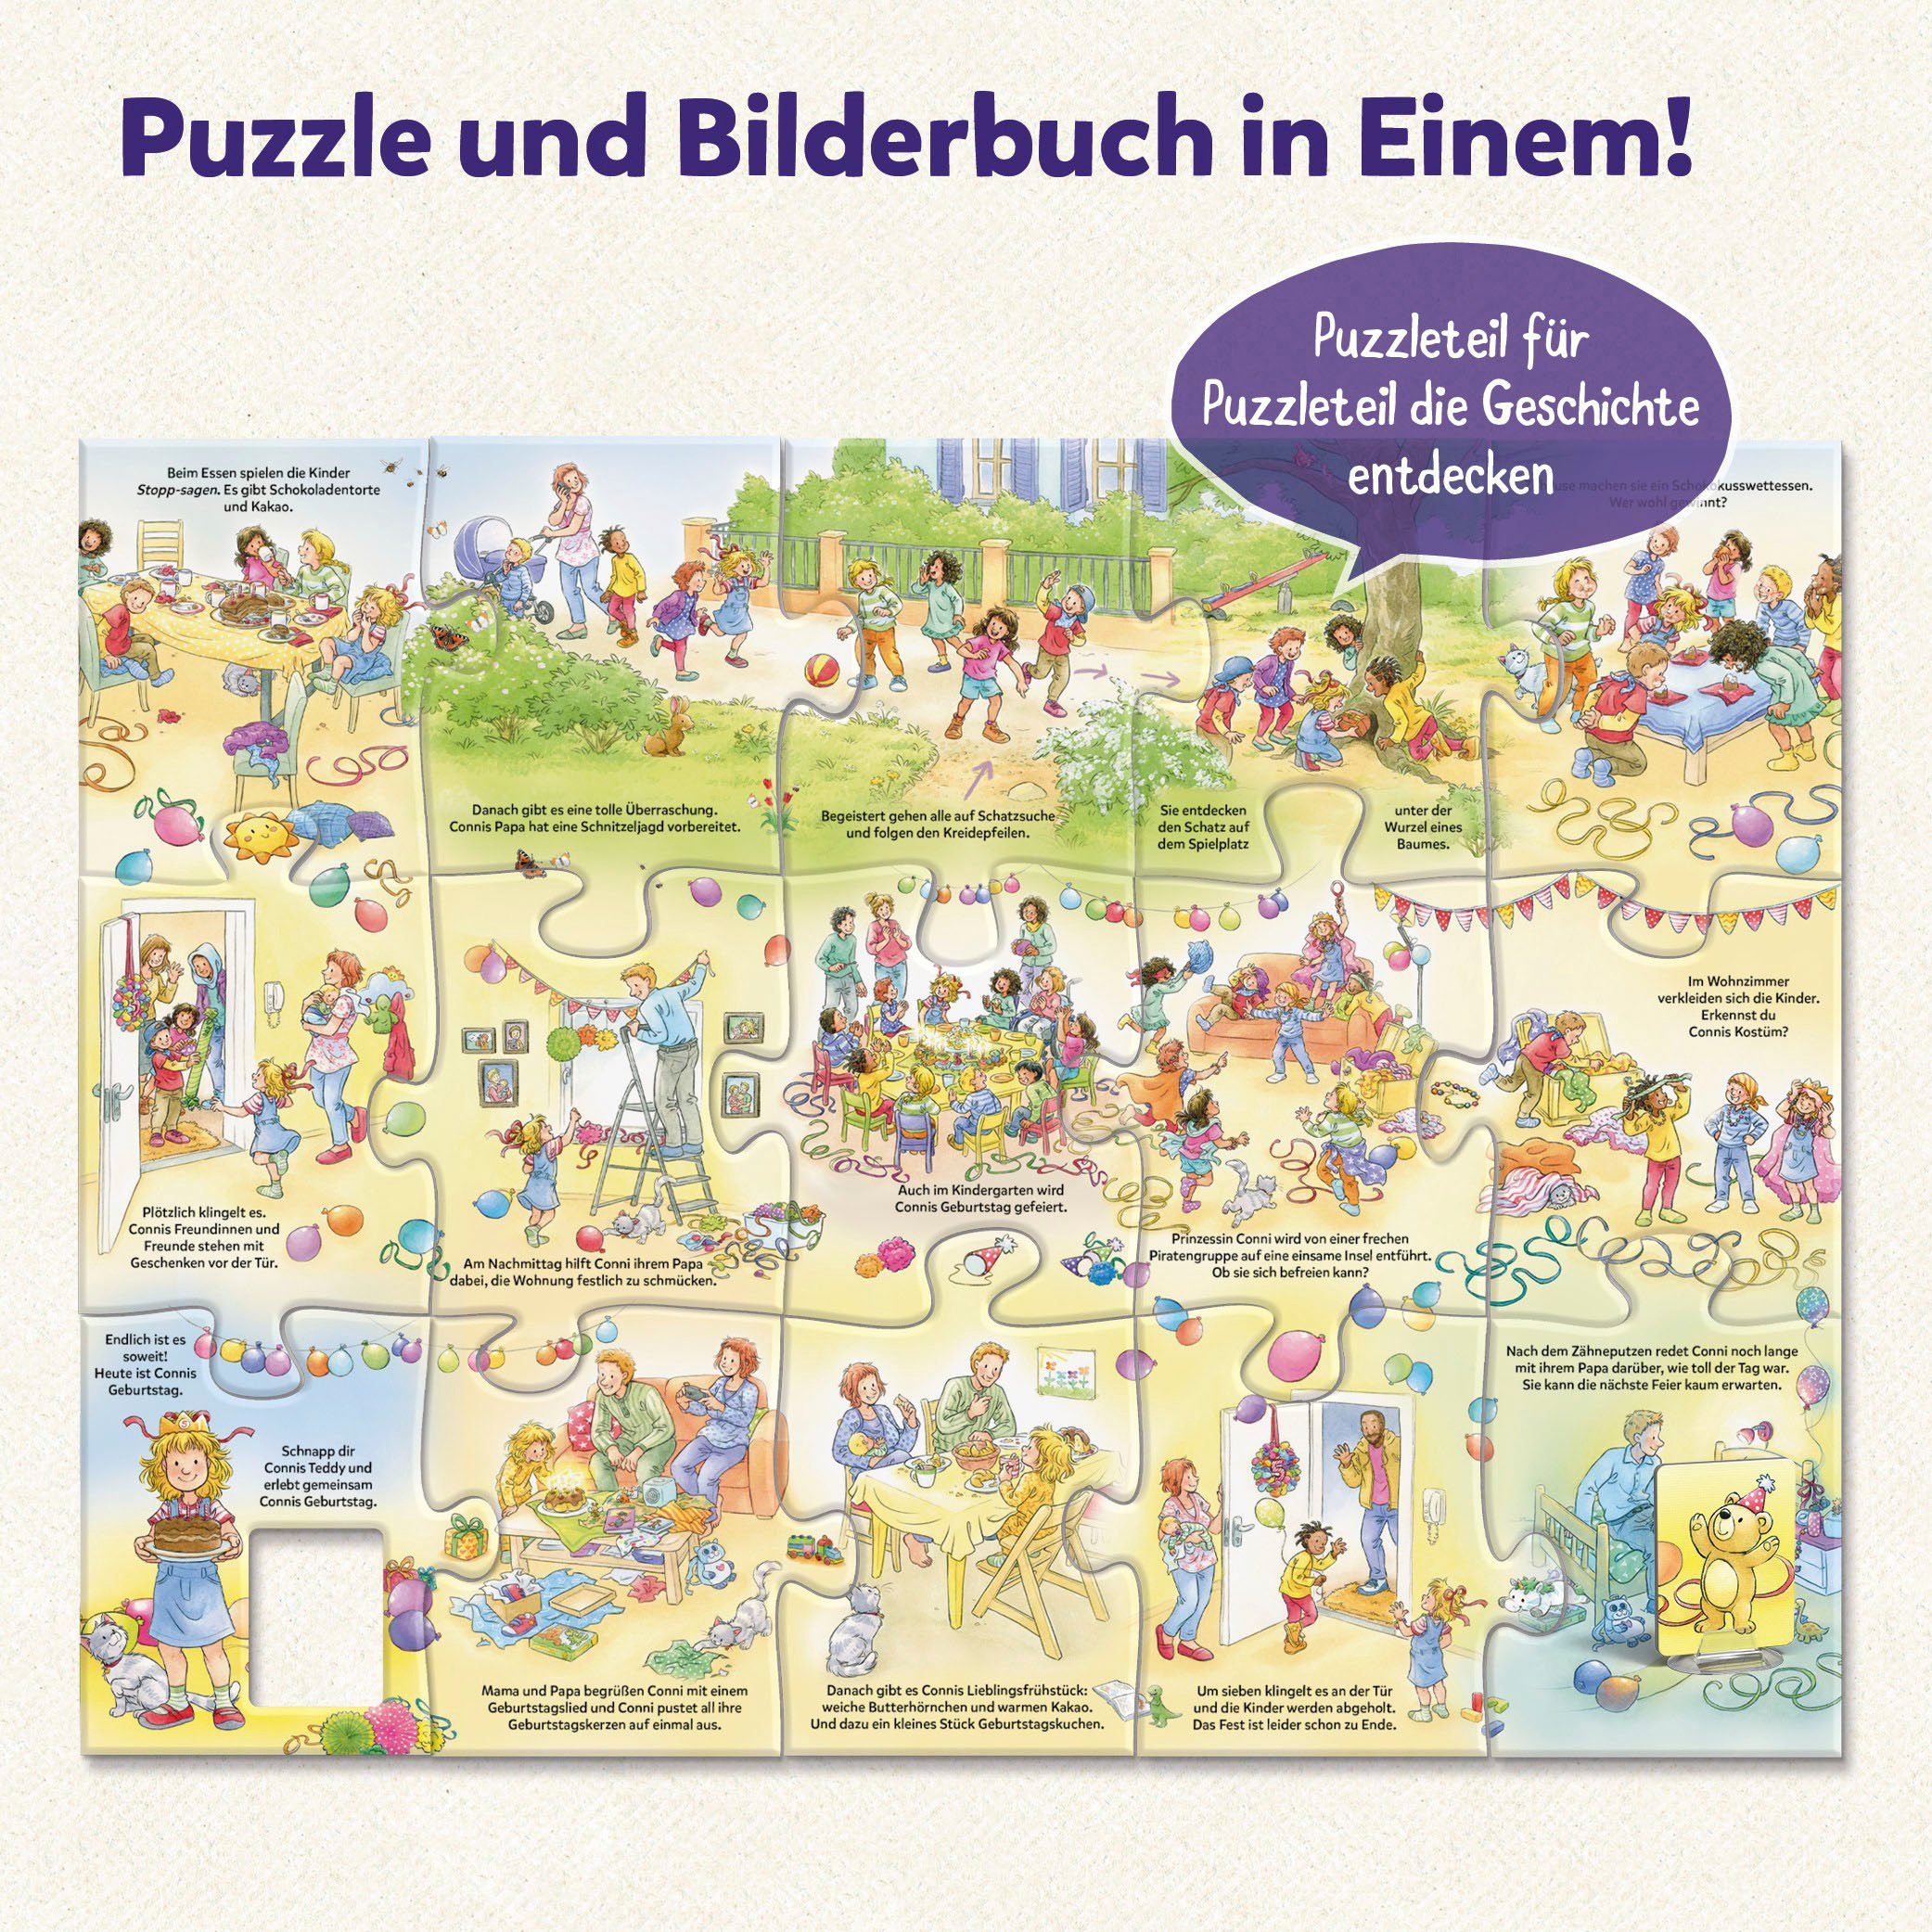 Kosmos Puzzle Mein Puzzleteile, Conni Made hat in Geburtstag, 15 Story-Puzzle erstes Germany 